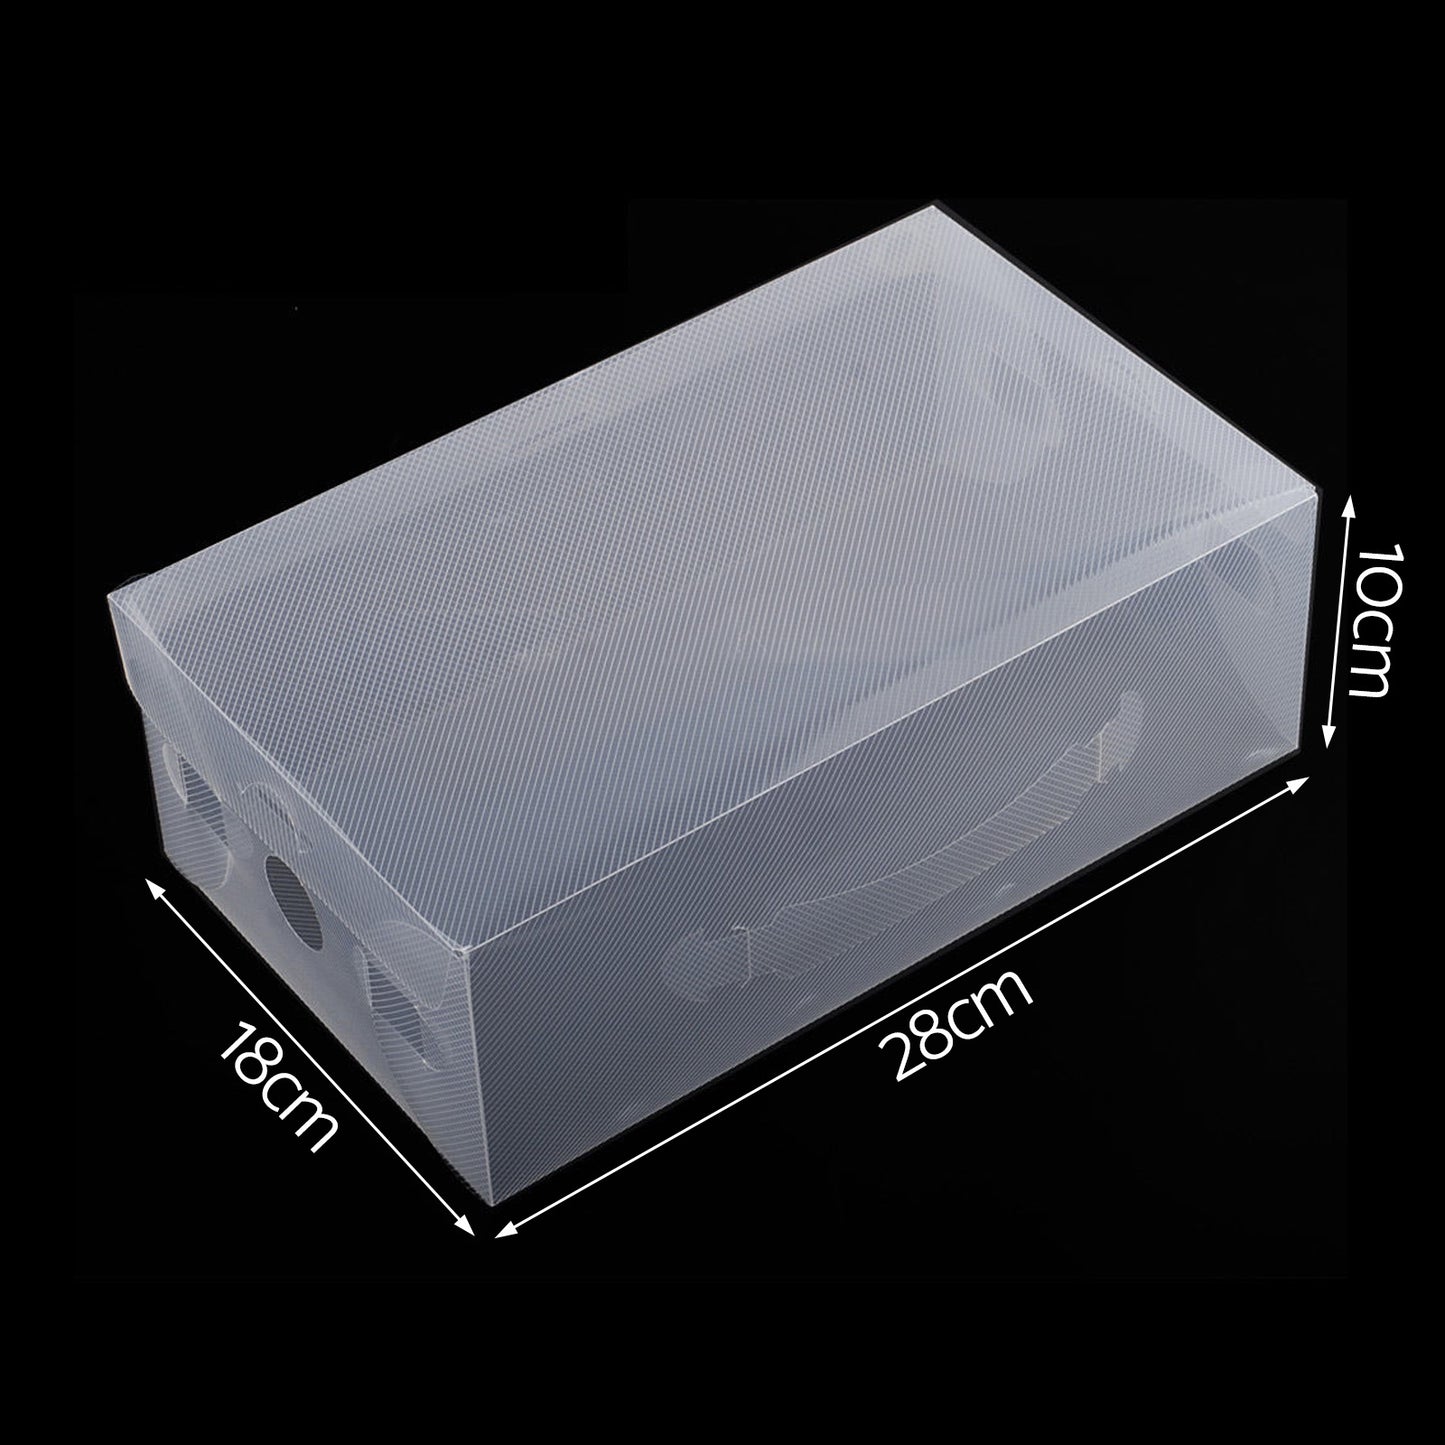 Artiss 20X Shoe Box Storage Clear Case Foldable Stackable